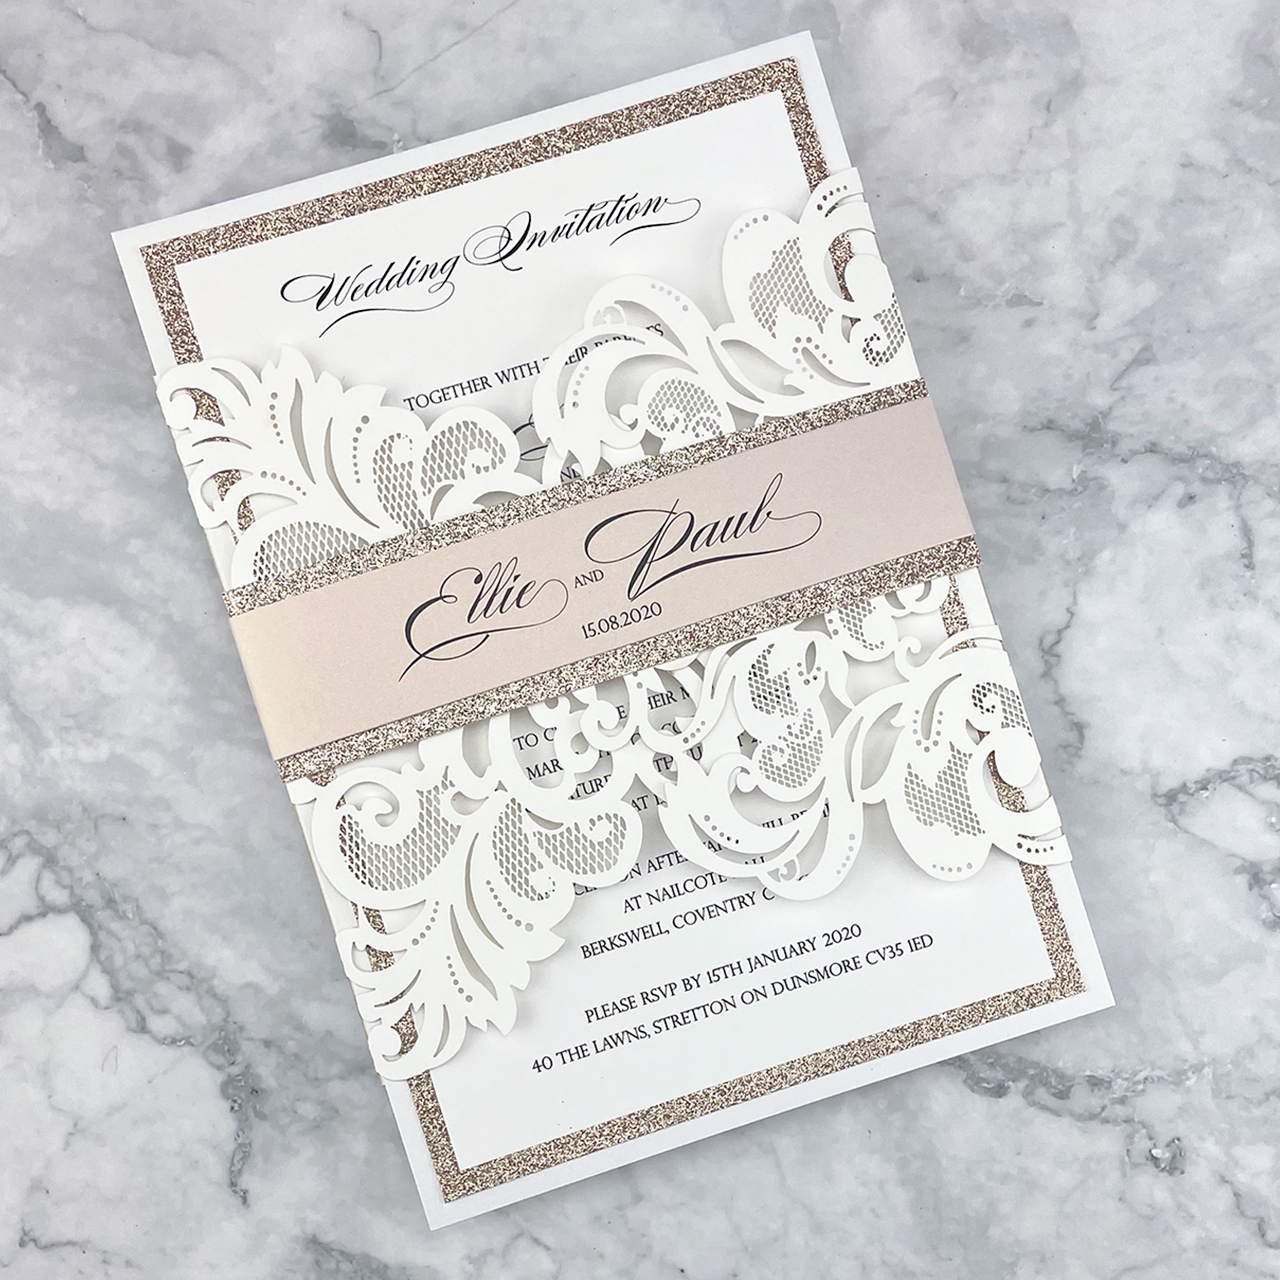 Personalised Laser Cut Wedding Day Evening Invitation Card with Free Envelopes 